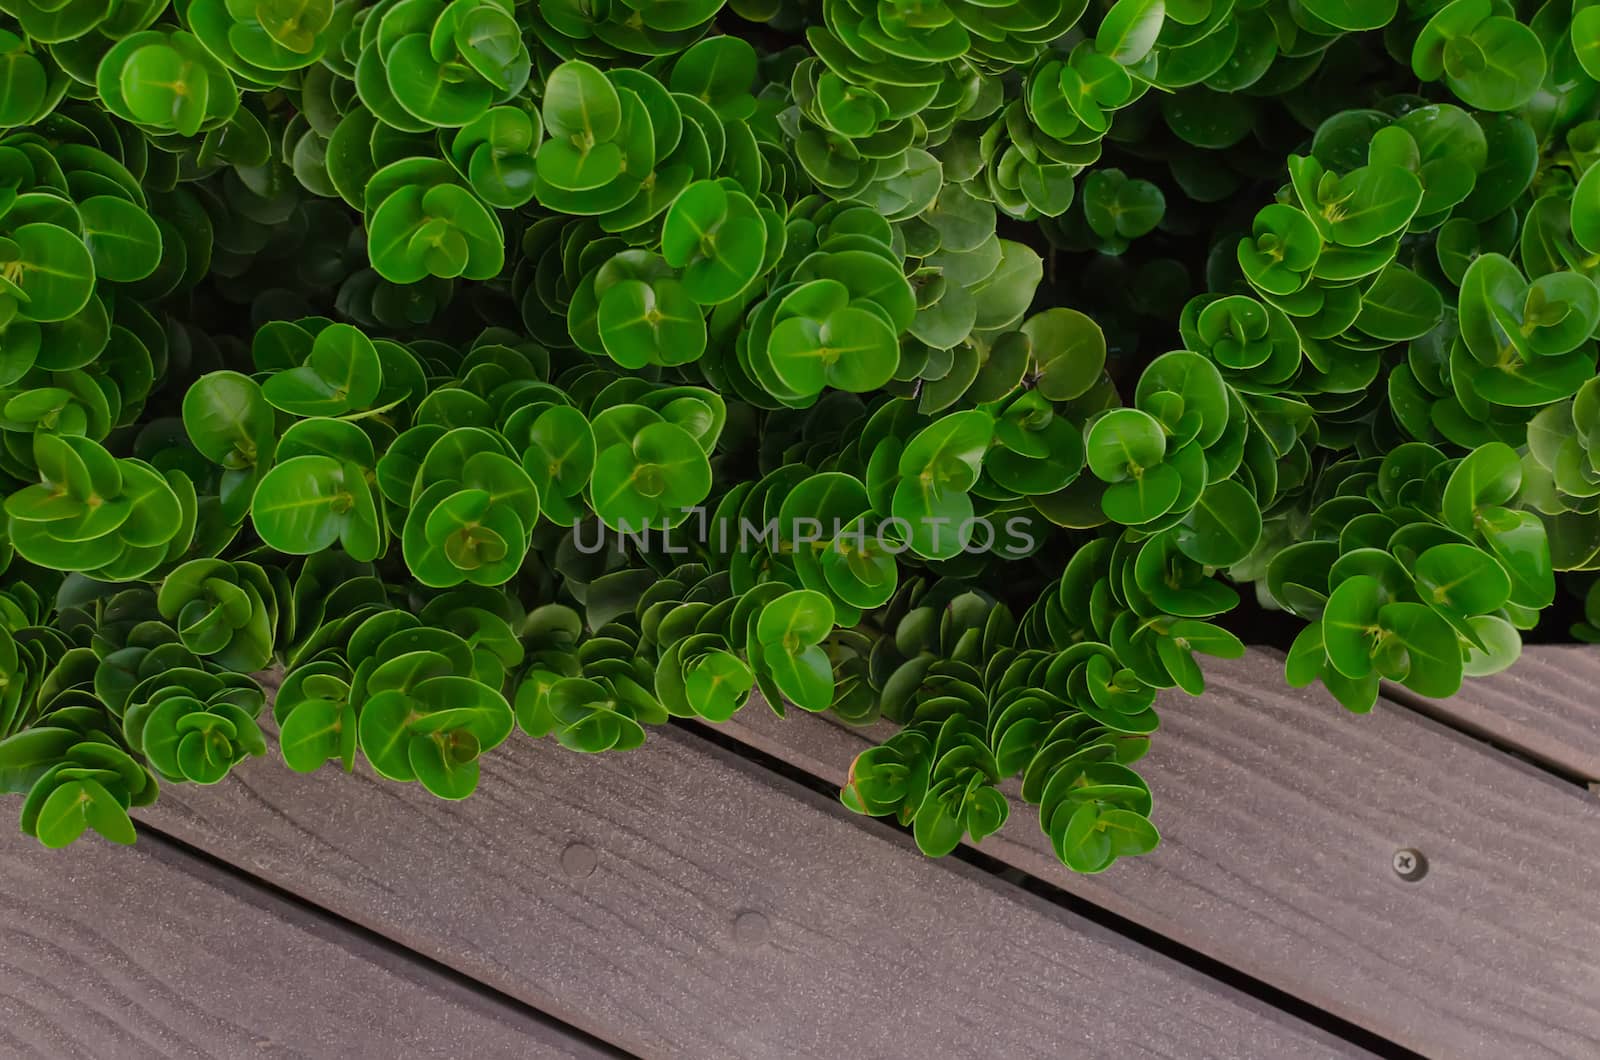 Little plant on wood background